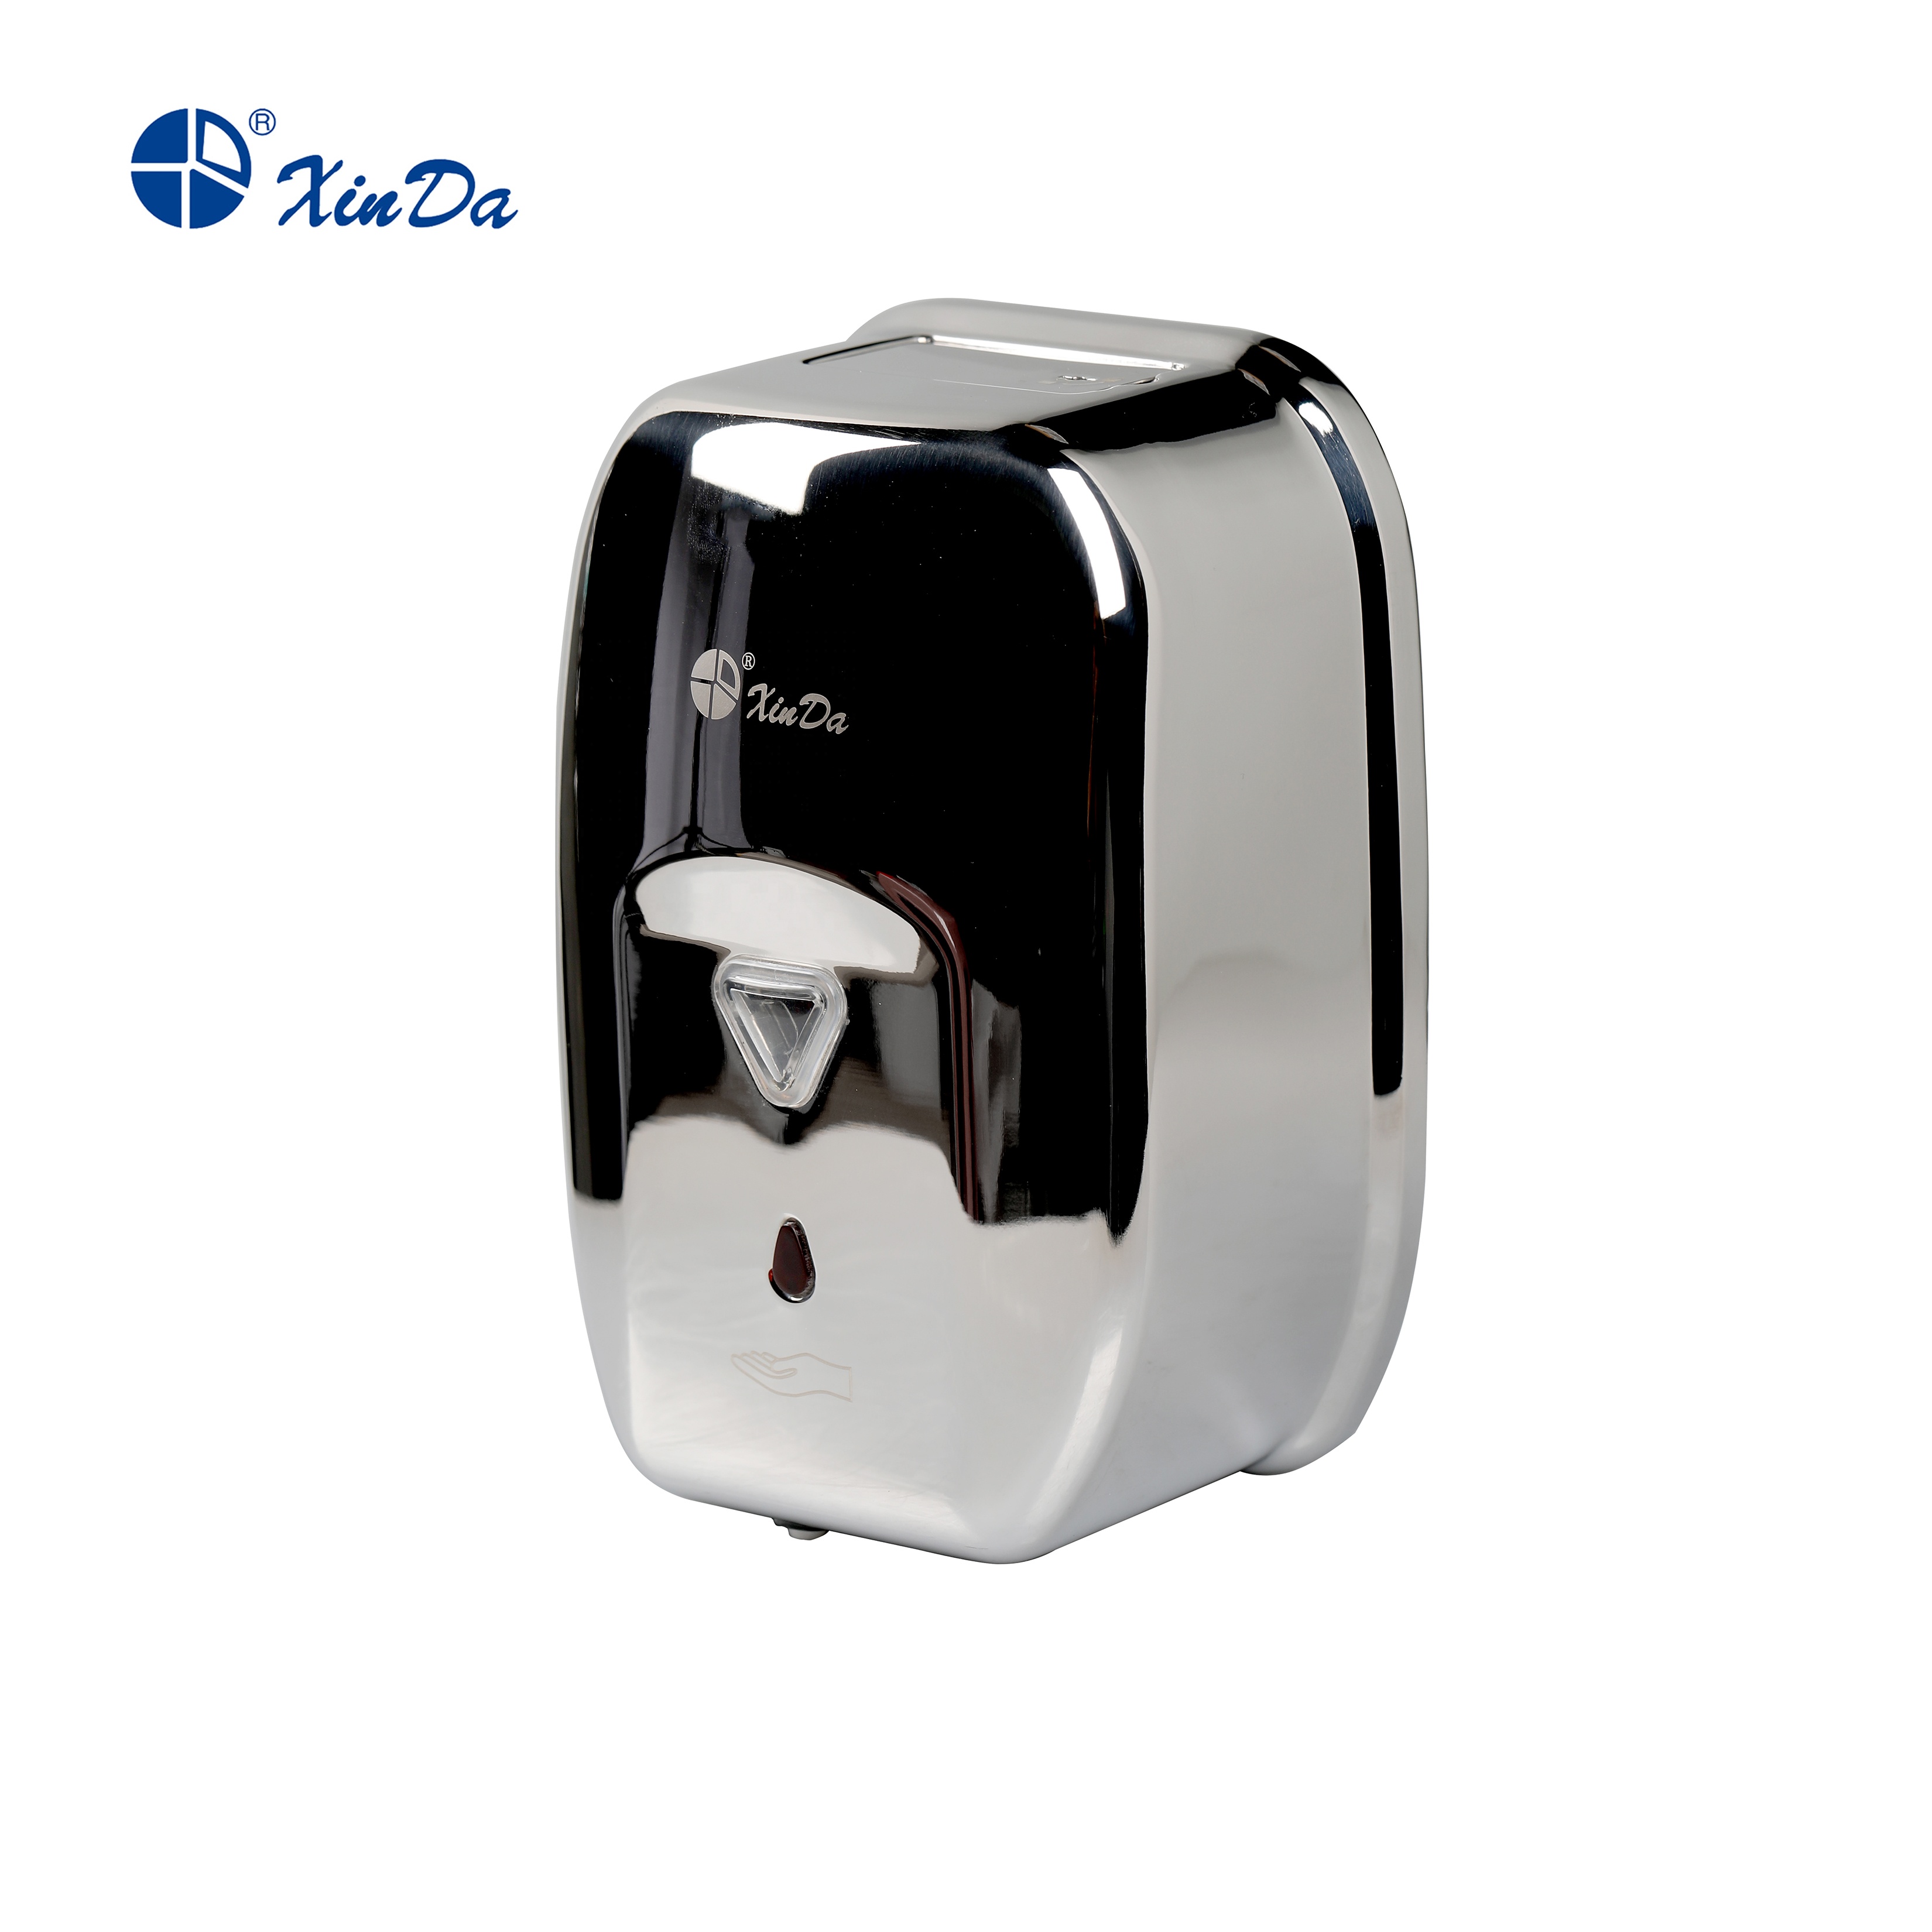 XINDA ZYQ120 Stainless Steel Automatic Metal Soap Dispenser